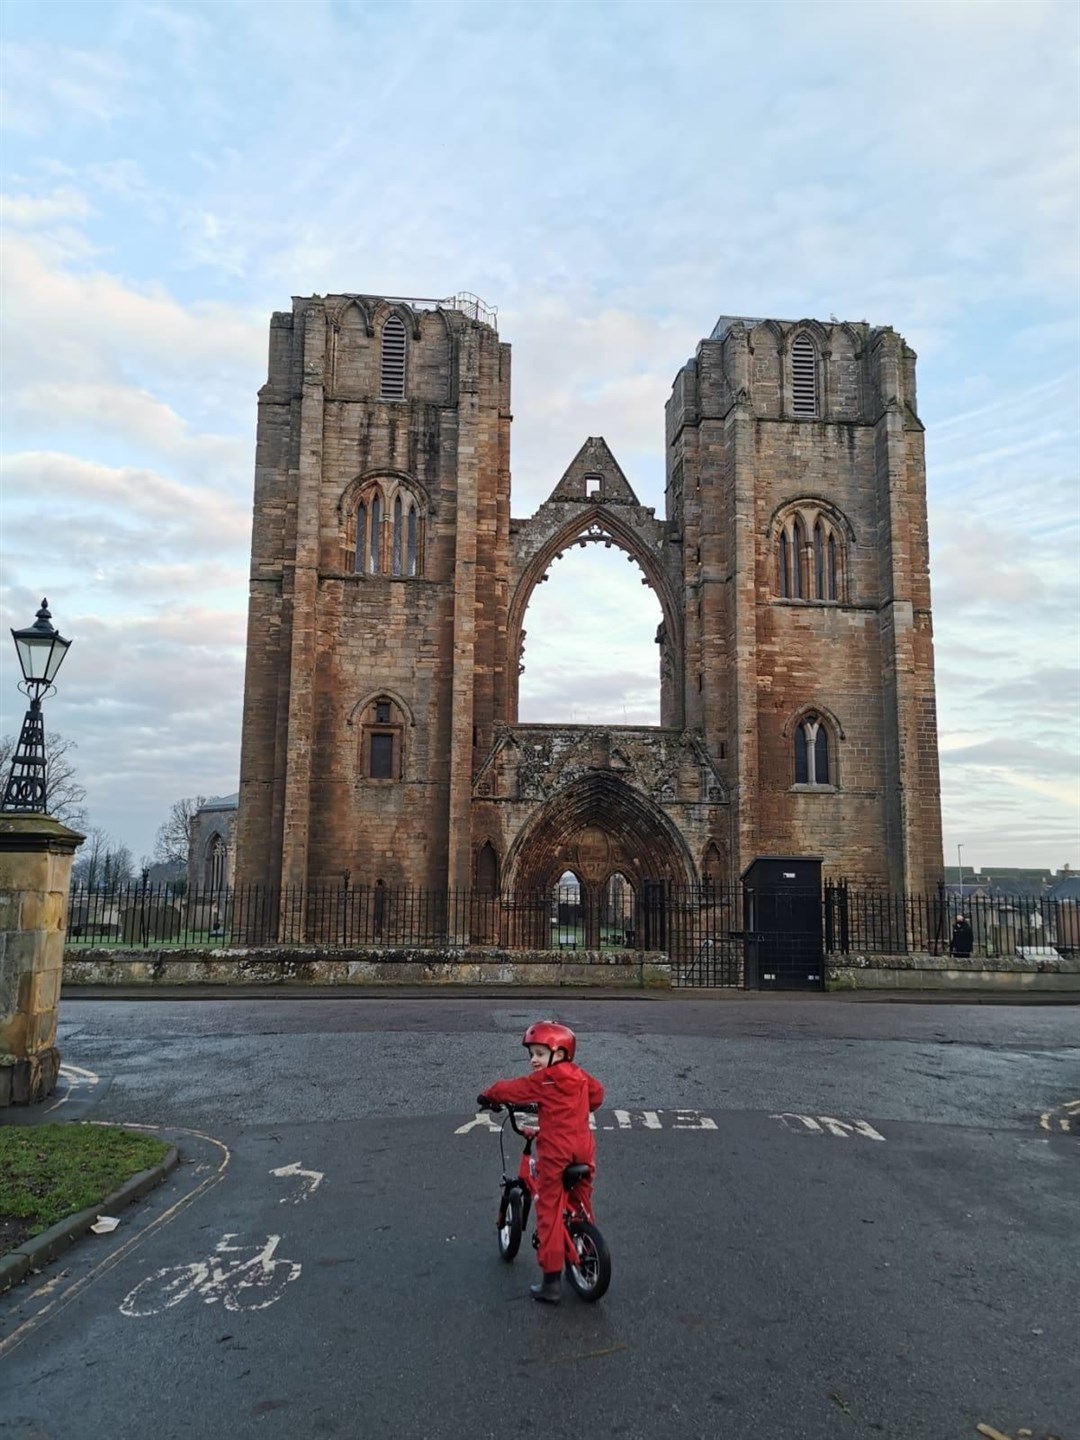 Archie pictured outside of Elgin Cathedral on one of his cycles.